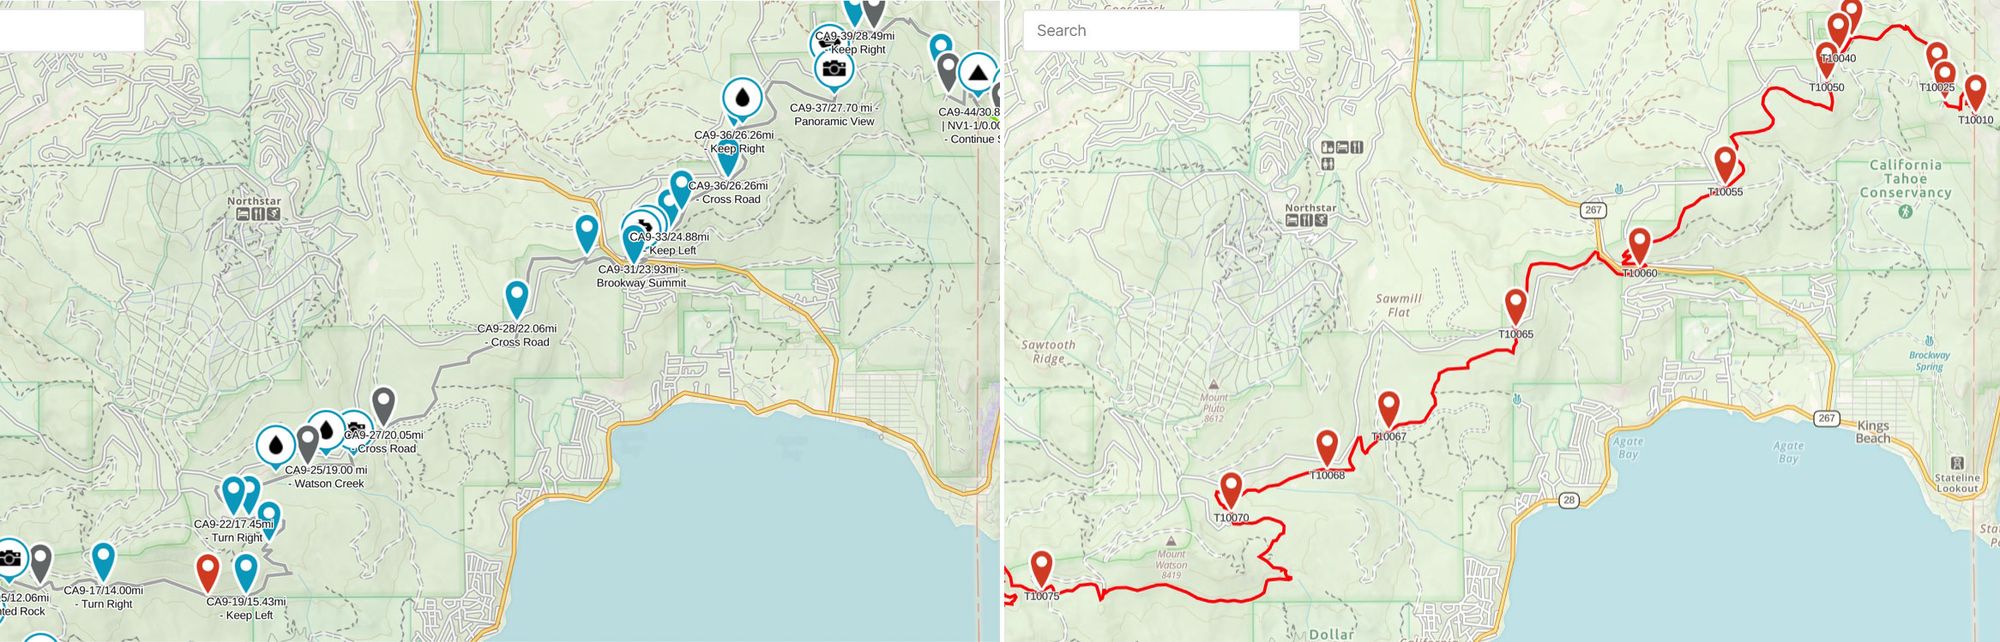 Comparison between The ADT Guide and American Discovery Trail Society waypoints for the same section of trail just north of Lake Tahoe.